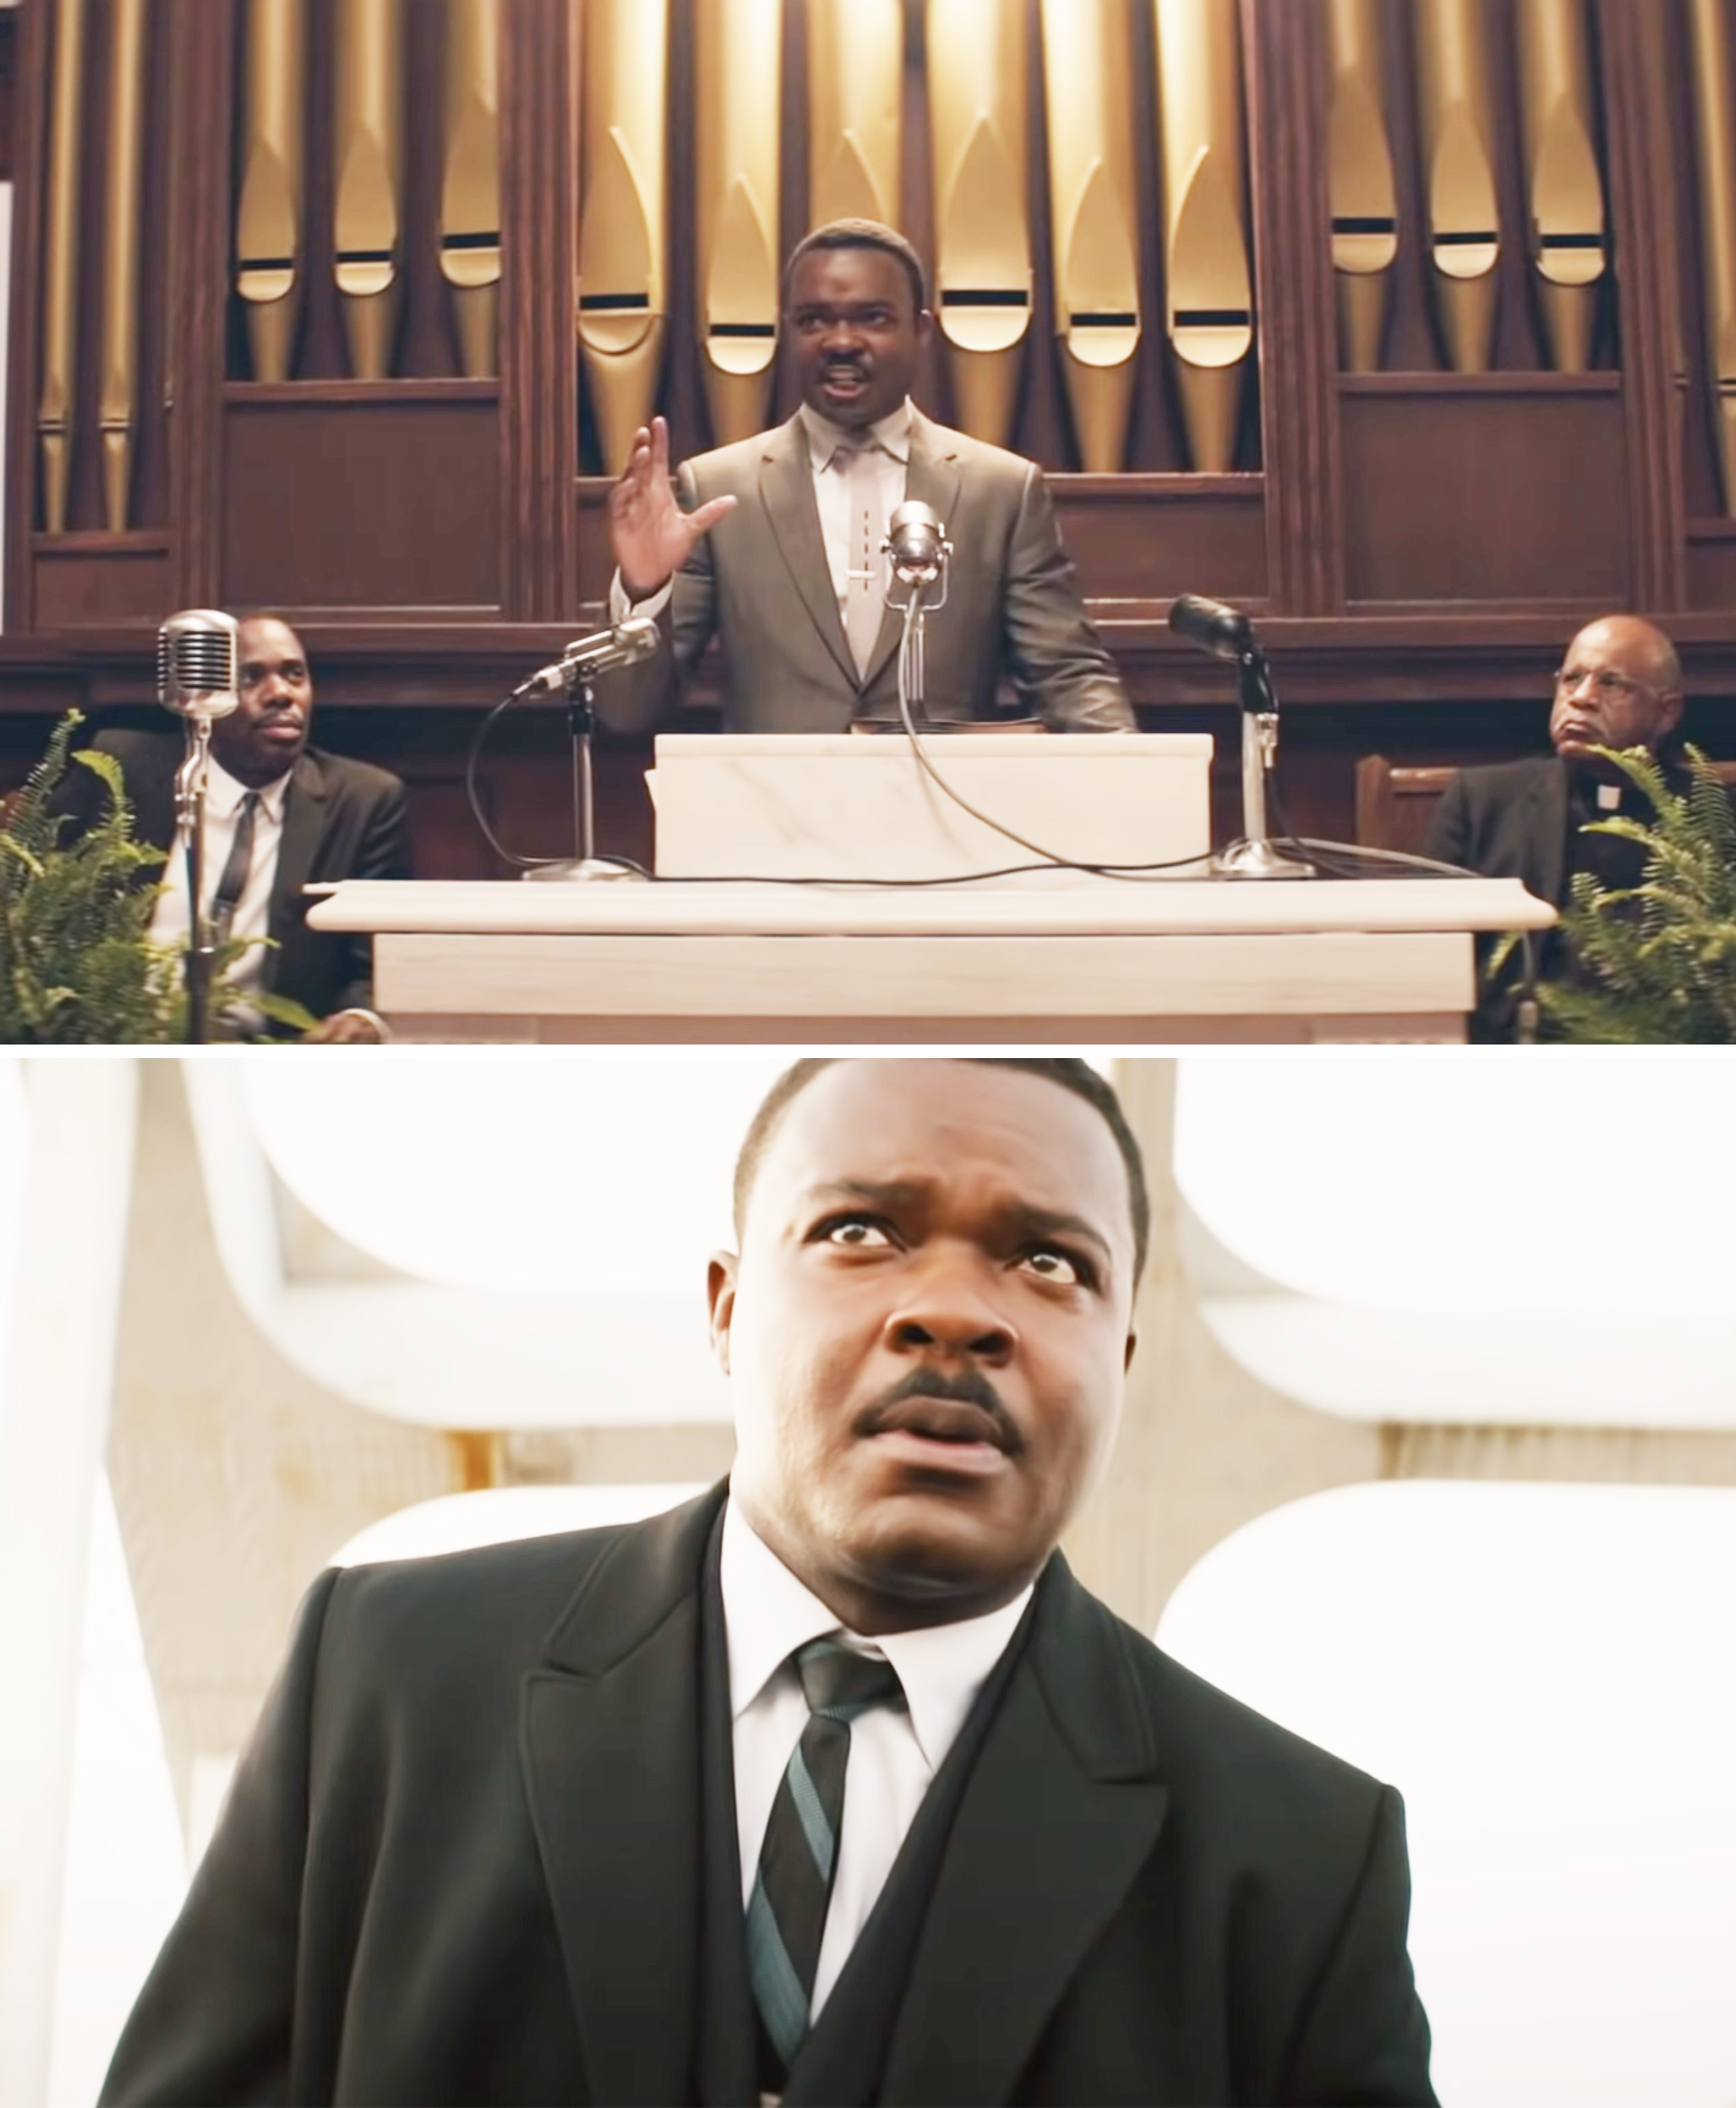 Actor portraying Martin Luther King Jr. gives a speech; intense close-up of his determined expression